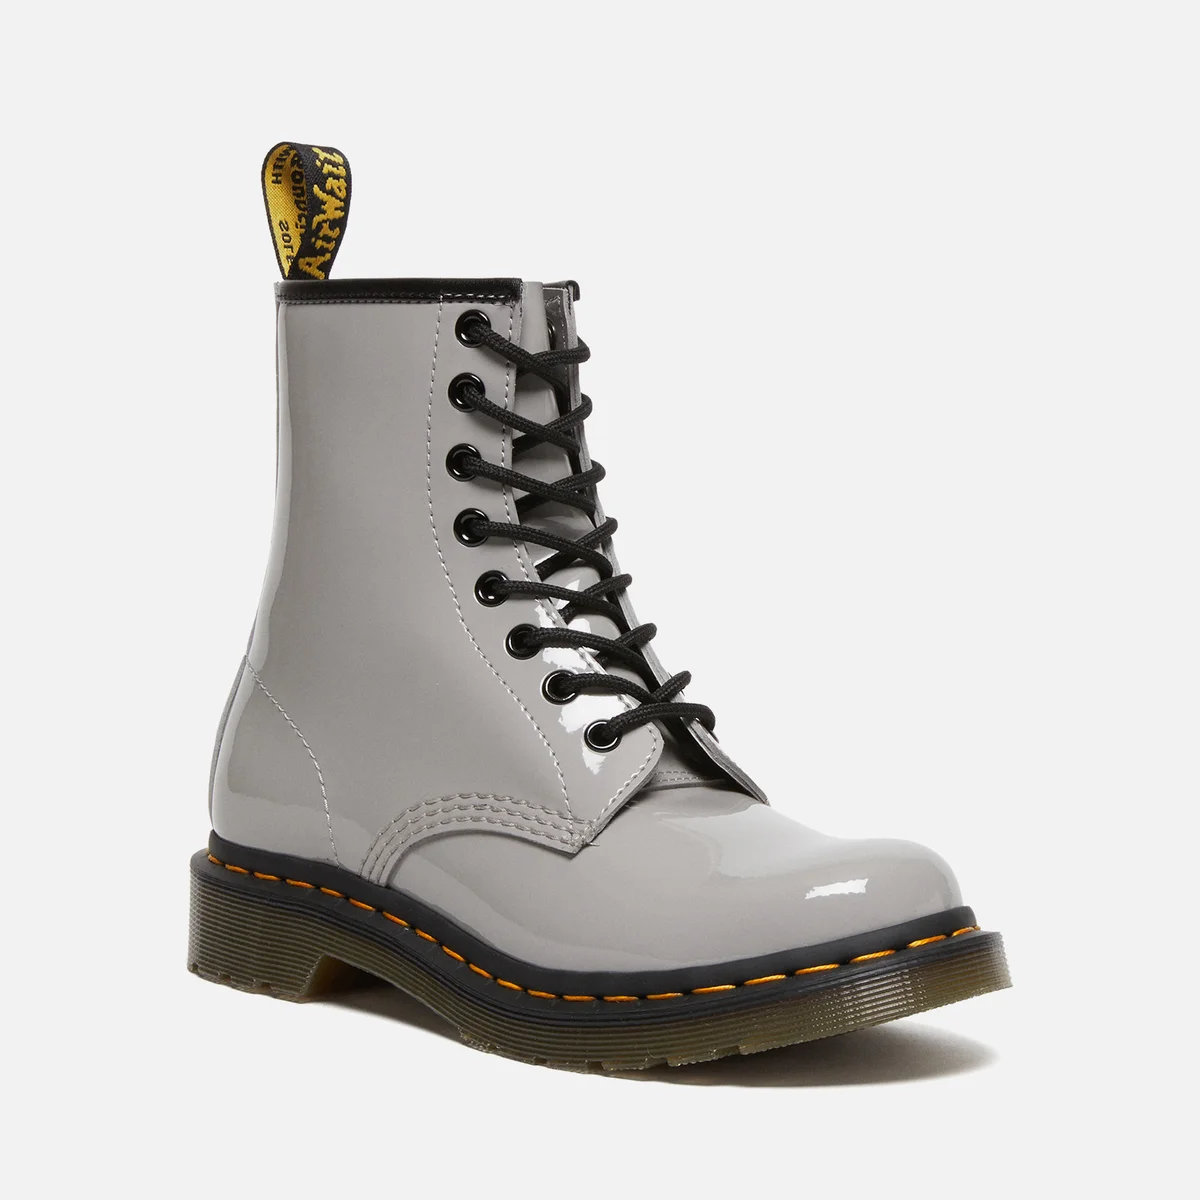 Dr. Martens 1460 Patent Lamper Leather 8-Eye Boots Image 1